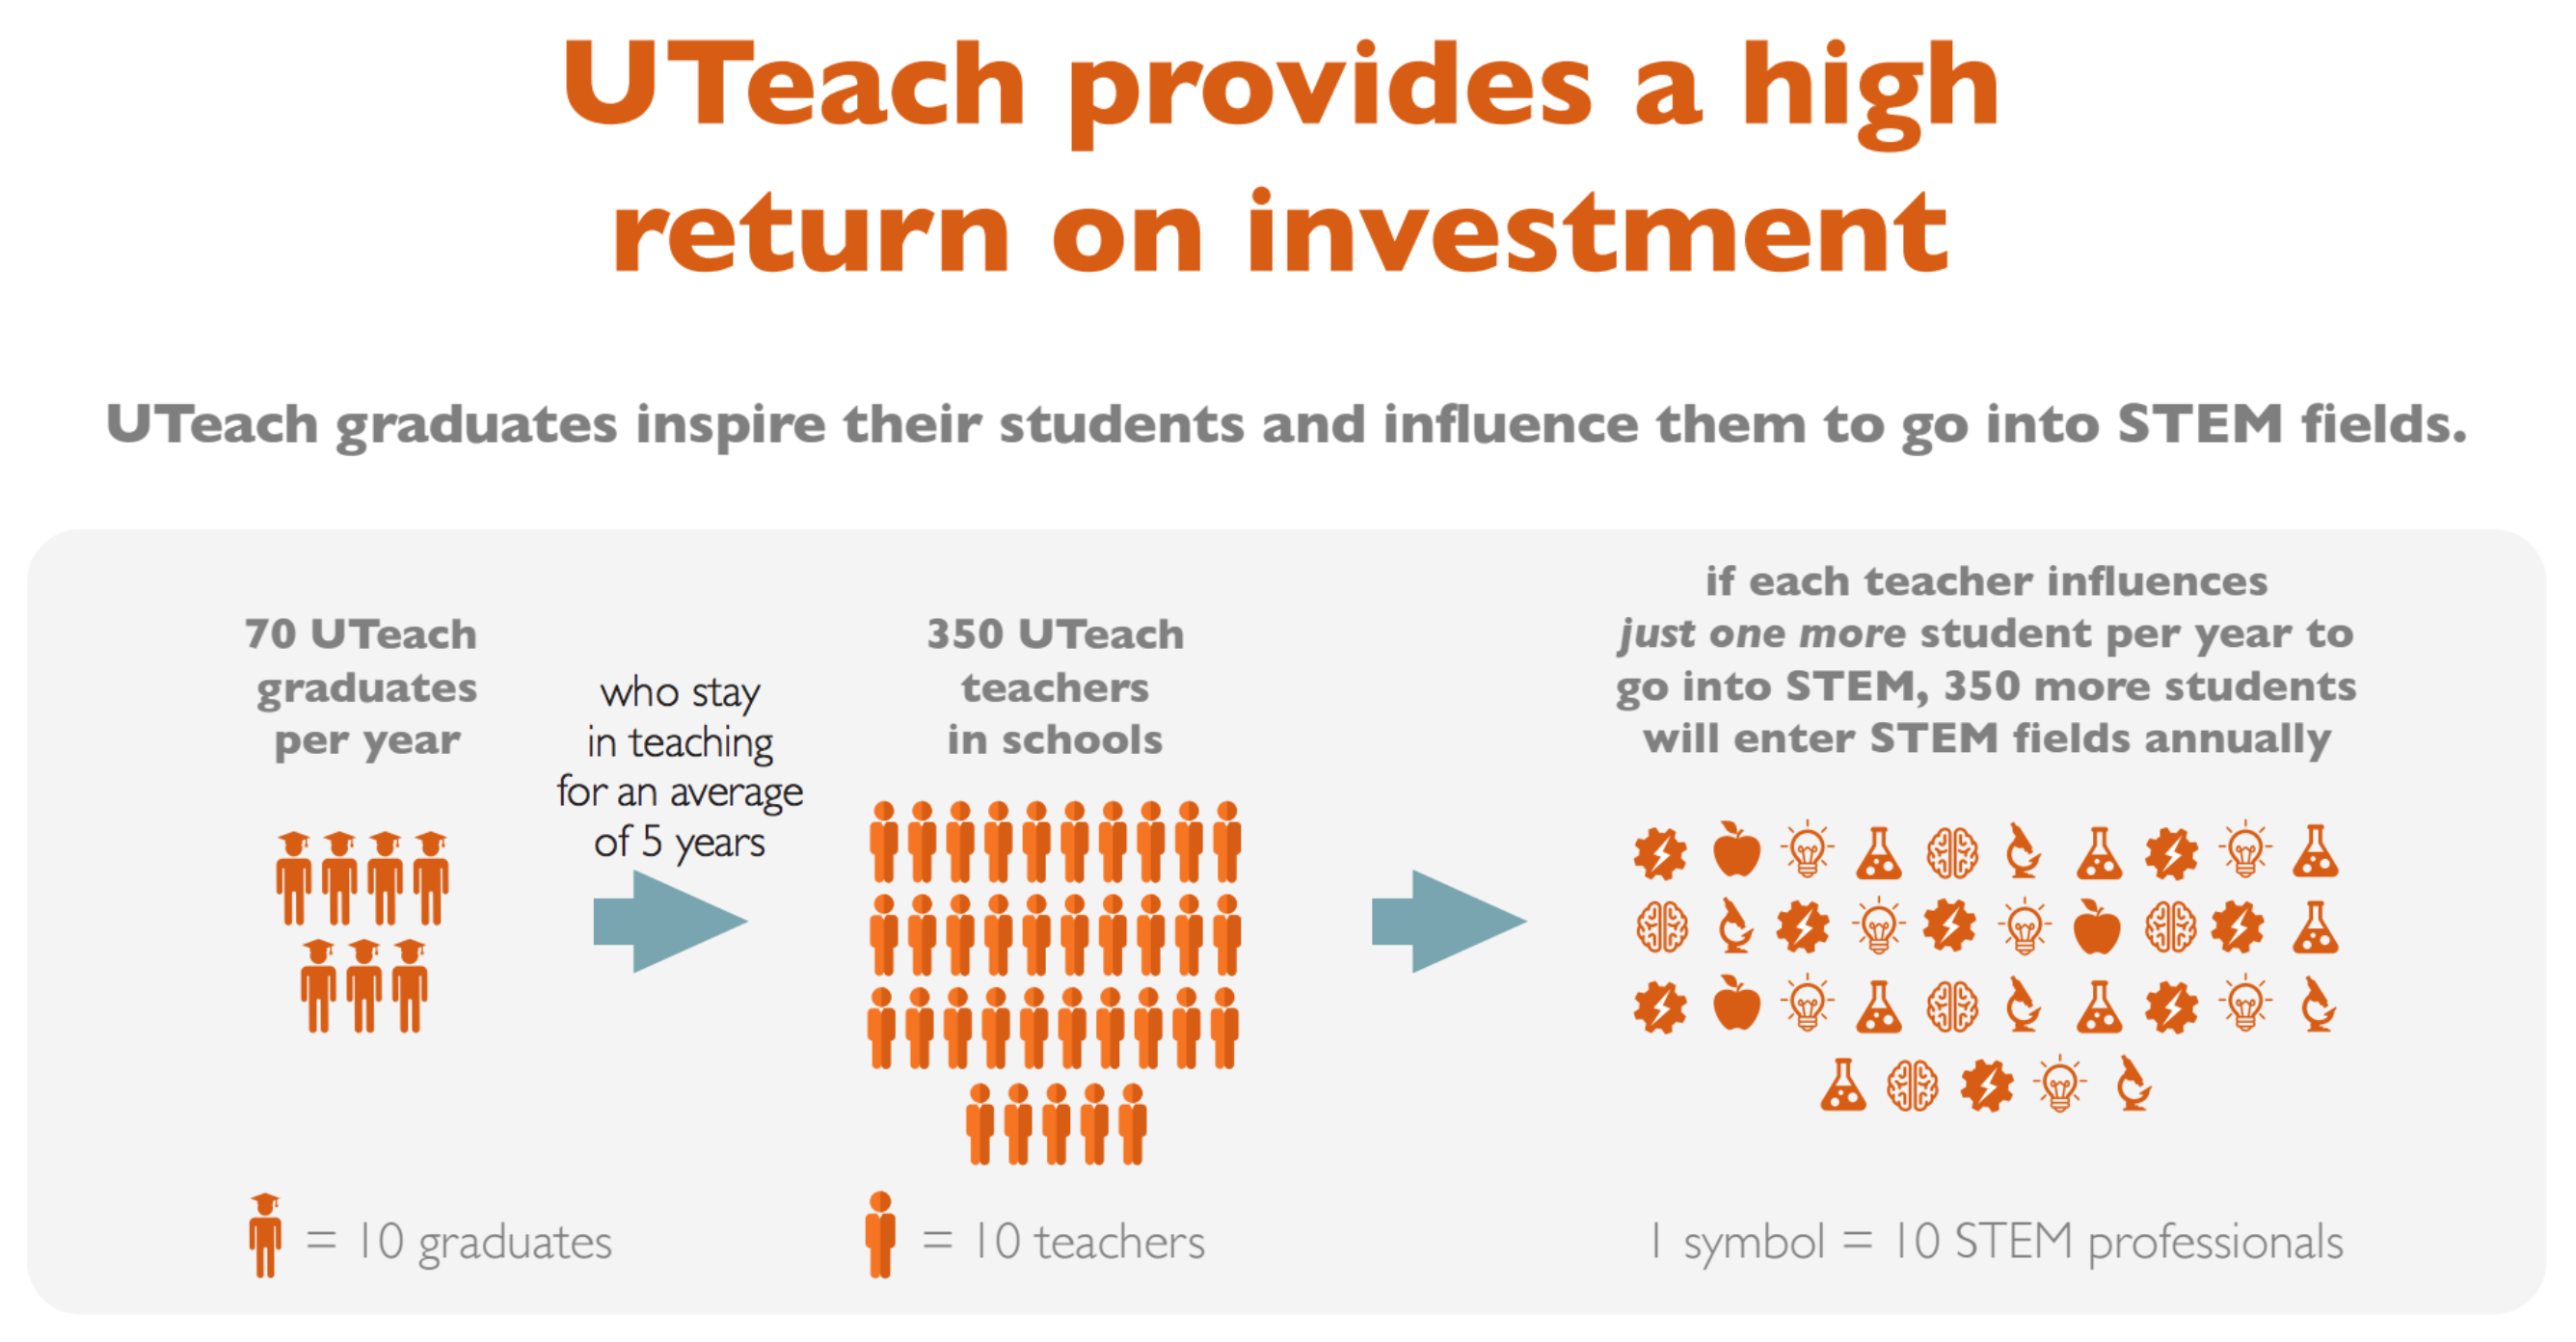 UTeach teachers impact over 350 students in their professional role compared to the 70 of a traditional teacher.